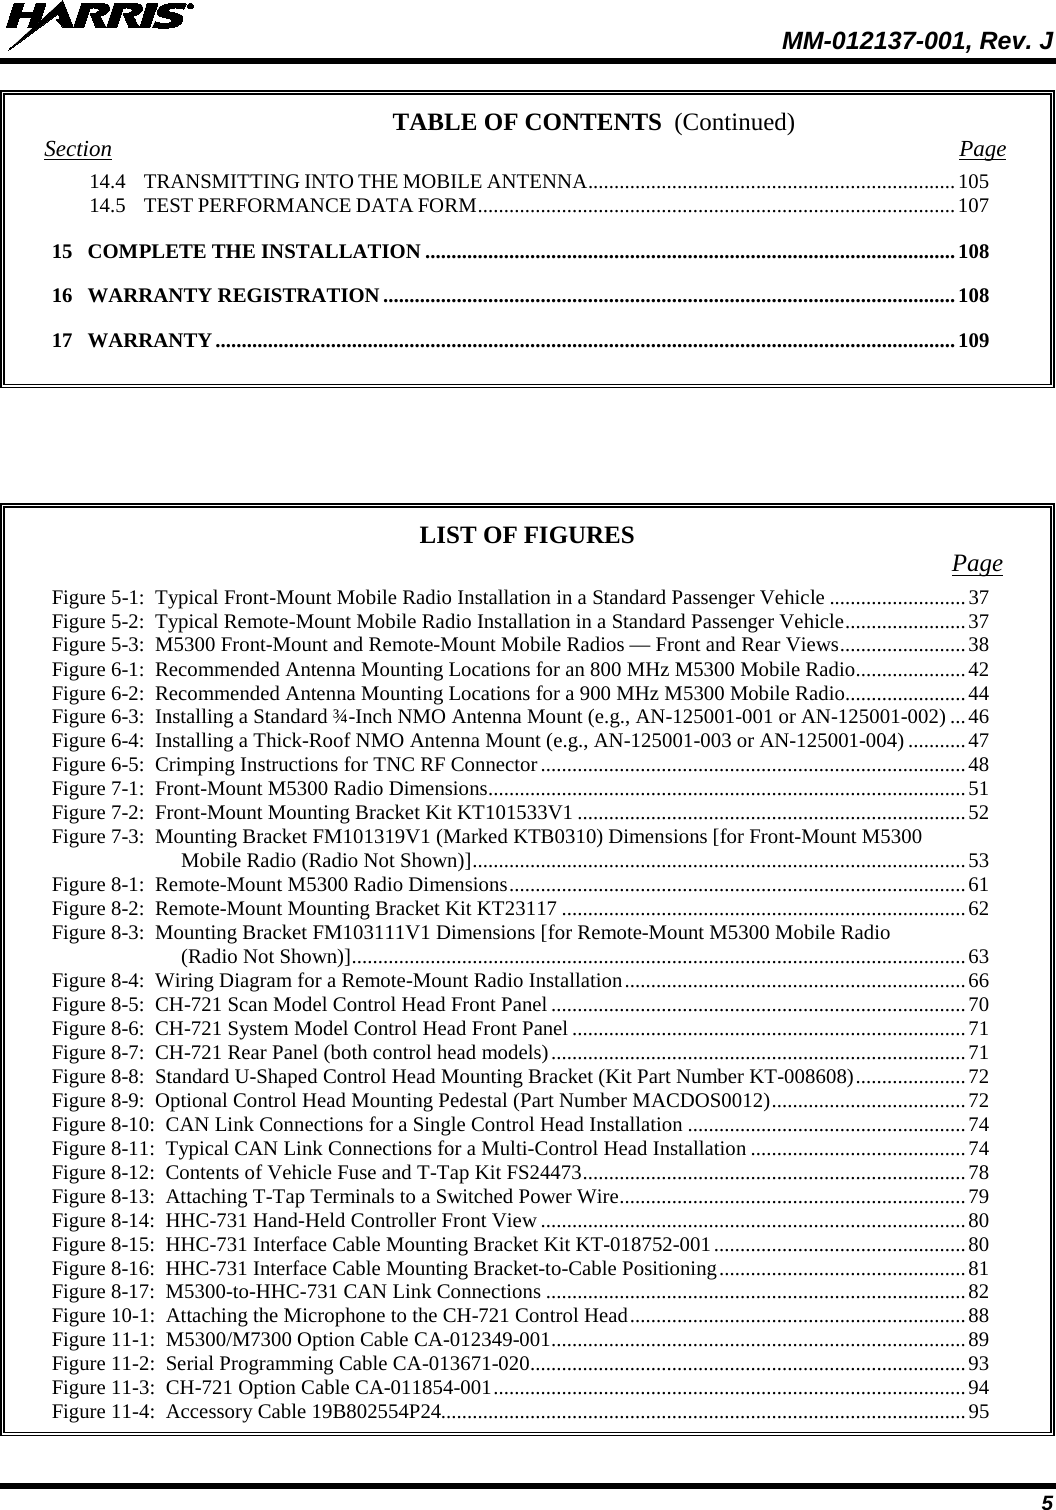  MM-012137-001, Rev. J 5 TABLE OF CONTENTS Section  Page 14.4 TRANSMITTING INTO THE MOBILE ANTENNA ...................................................................... 105 14.5 TEST PERFORMANCE DATA FORM ........................................................................................... 107 15 COMPLETE THE INSTALLATION ..................................................................................................... 108 16 WARRANTY REGISTRATION ............................................................................................................. 108 17 WARRANTY ............................................................................................................................................. 109          LIST OF FIGURES Page Figure 5-1:  Typical Front-Mount Mobile Radio Installation in a Standard Passenger Vehicle .......................... 37 Figure 5-2:  Typical Remote-Mount Mobile Radio Installation in a Standard Passenger Vehicle ....................... 37 Figure 5-3:  M5300 Front-Mount and Remote-Mount Mobile Radios — Front and Rear Views ........................ 38 Figure 6-1:  Recommended Antenna Mounting Locations for an 800 MHz M5300 Mobile Radio ..................... 42 Figure 6-2:  Recommended Antenna Mounting Locations for a 900 MHz M5300 Mobile Radio ....................... 44 Figure 6-3:  Installing a Standard ¾-Inch NMO Antenna Mount (e.g., AN-125001-001 or AN-125001-002) ... 46 Figure 6-4:  Installing a Thick-Roof NMO Antenna Mount (e.g., AN-125001-003 or AN-125001-004) ........... 47 Figure 6-5:  Crimping Instructions for TNC RF Connector ................................................................................. 48 Figure 7-1:  Front-Mount M5300 Radio Dimensions ........................................................................................... 51 Figure 7-2:  Front-Mount Mounting Bracket Kit KT101533V1 .......................................................................... 52 Figure 7-3:  Mounting Bracket FM101319V1 (Marked KTB0310) Dimensions [for Front-Mount M5300 Mobile Radio (Radio Not Shown)] .............................................................................................. 53 Figure 8-1:  Remote-Mount M5300 Radio Dimensions ....................................................................................... 61 Figure 8-2:  Remote-Mount Mounting Bracket Kit KT23117 ............................................................................. 62 Figure 8-3:  Mounting Bracket FM103111V1 Dimensions [for Remote-Mount M5300 Mobile Radio (Radio Not Shown)] ..................................................................................................................... 63 Figure 8-4:  Wiring Diagram for a Remote-Mount Radio Installation ................................................................. 66 Figure 8-5:  CH-721 Scan Model Control Head Front Panel ............................................................................... 70 Figure 8-6:  CH-721 System Model Control Head Front Panel ........................................................................... 71 Figure 8-7:  CH-721 Rear Panel (both control head models) ............................................................................... 71 Figure 8-8:  Standard U-Shaped Control Head Mounting Bracket (Kit Part Number KT-008608) ..................... 72 Figure 8-9:  Optional Control Head Mounting Pedestal (Part Number MACDOS0012) ..................................... 72 Figure 8-10:  CAN Link Connections for a Single Control Head Installation ..................................................... 74 Figure 8-11:  Typical CAN Link Connections for a Multi-Control Head Installation ......................................... 74 Figure 8-12:  Contents of Vehicle Fuse and T-Tap Kit FS24473 ......................................................................... 78 Figure 8-13:  Attaching T-Tap Terminals to a Switched Power Wire .................................................................. 79 Figure 8-14:  HHC-731 Hand-Held Controller Front View ................................................................................. 80 Figure 8-15:  HHC-731 Interface Cable Mounting Bracket Kit KT-018752-001 ................................................ 80 Figure 8-16:  HHC-731 Interface Cable Mounting Bracket-to-Cable Positioning ............................................... 81 Figure 8-17:  M5300-to-HHC-731 CAN Link Connections ................................................................................ 82 Figure 10-1:  Attaching the Microphone to the CH-721 Control Head ................................................................ 88 Figure 11-1:  M5300/M7300 Option Cable CA-012349-001 ............................................................................... 89 Figure 11-2:  Serial Programming Cable CA-013671-020 ................................................................................... 93 Figure 11-3:  CH-721 Option Cable CA-011854-001 .......................................................................................... 94 Figure 11-4:  Accessory Cable 19B802554P24.................................................................................................... 95 (Continued) 